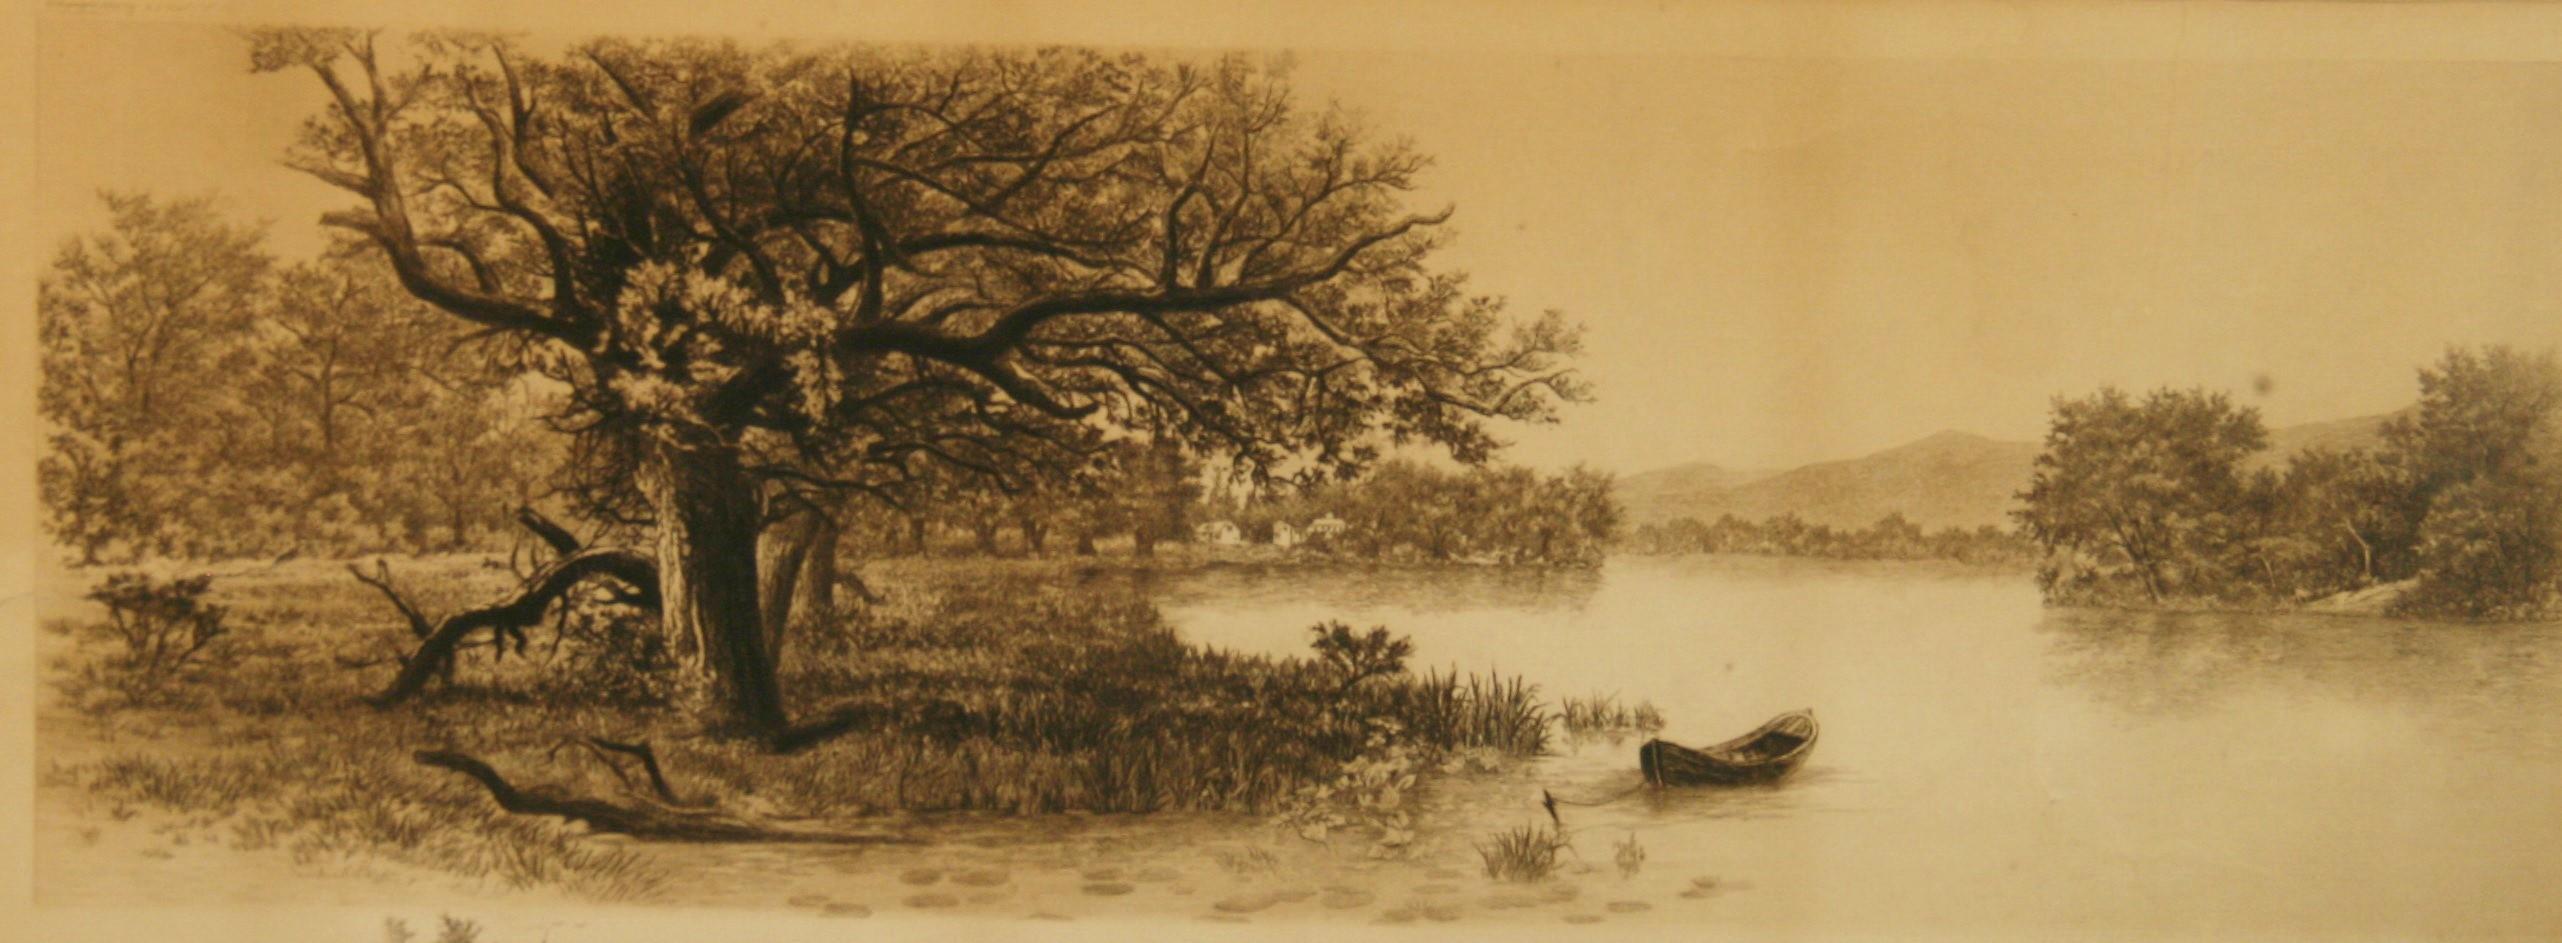 Antique Hudson River Engraving Oak Tree on the River 1897 - Print by Charles Westerly